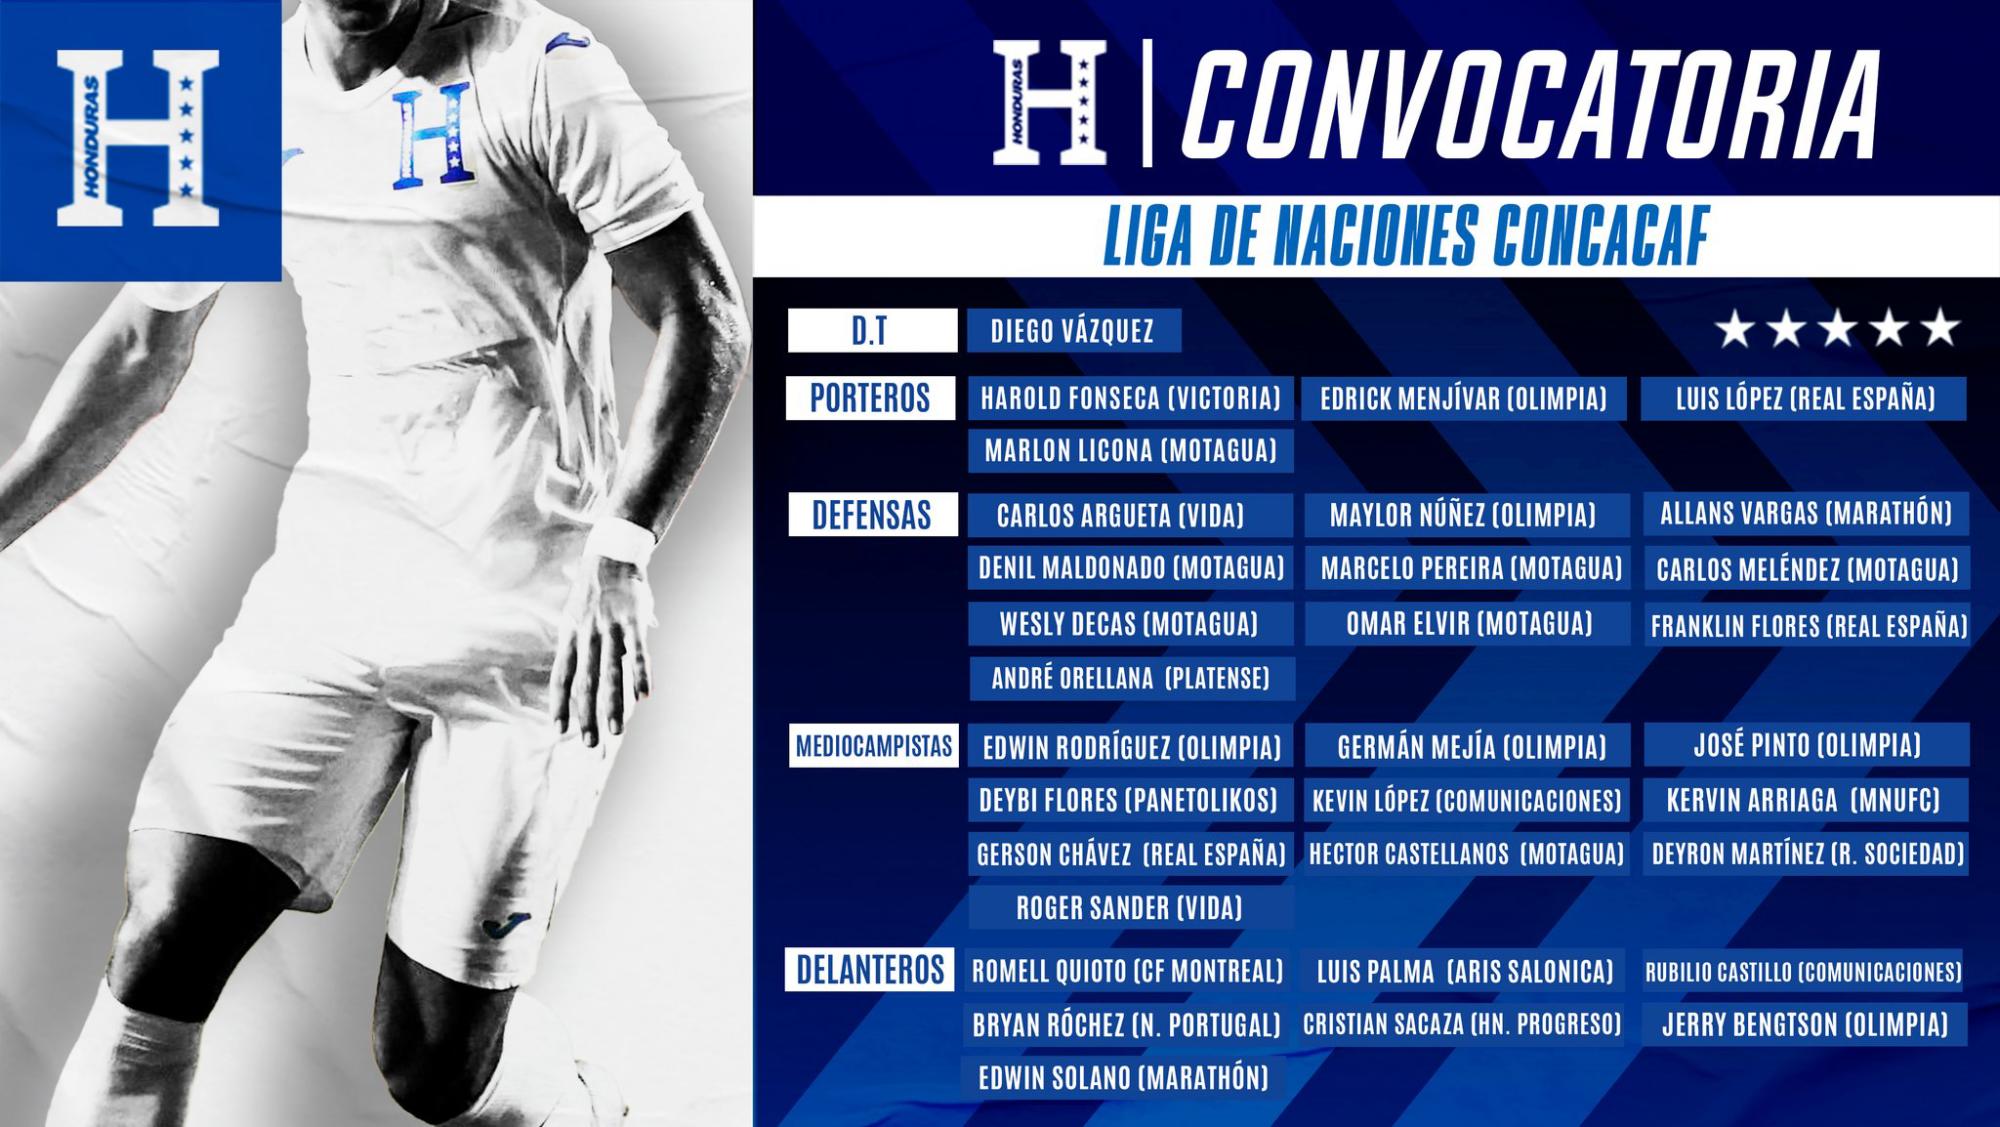 OFFICIAL Call for the Honduran National Team for the Concacaf